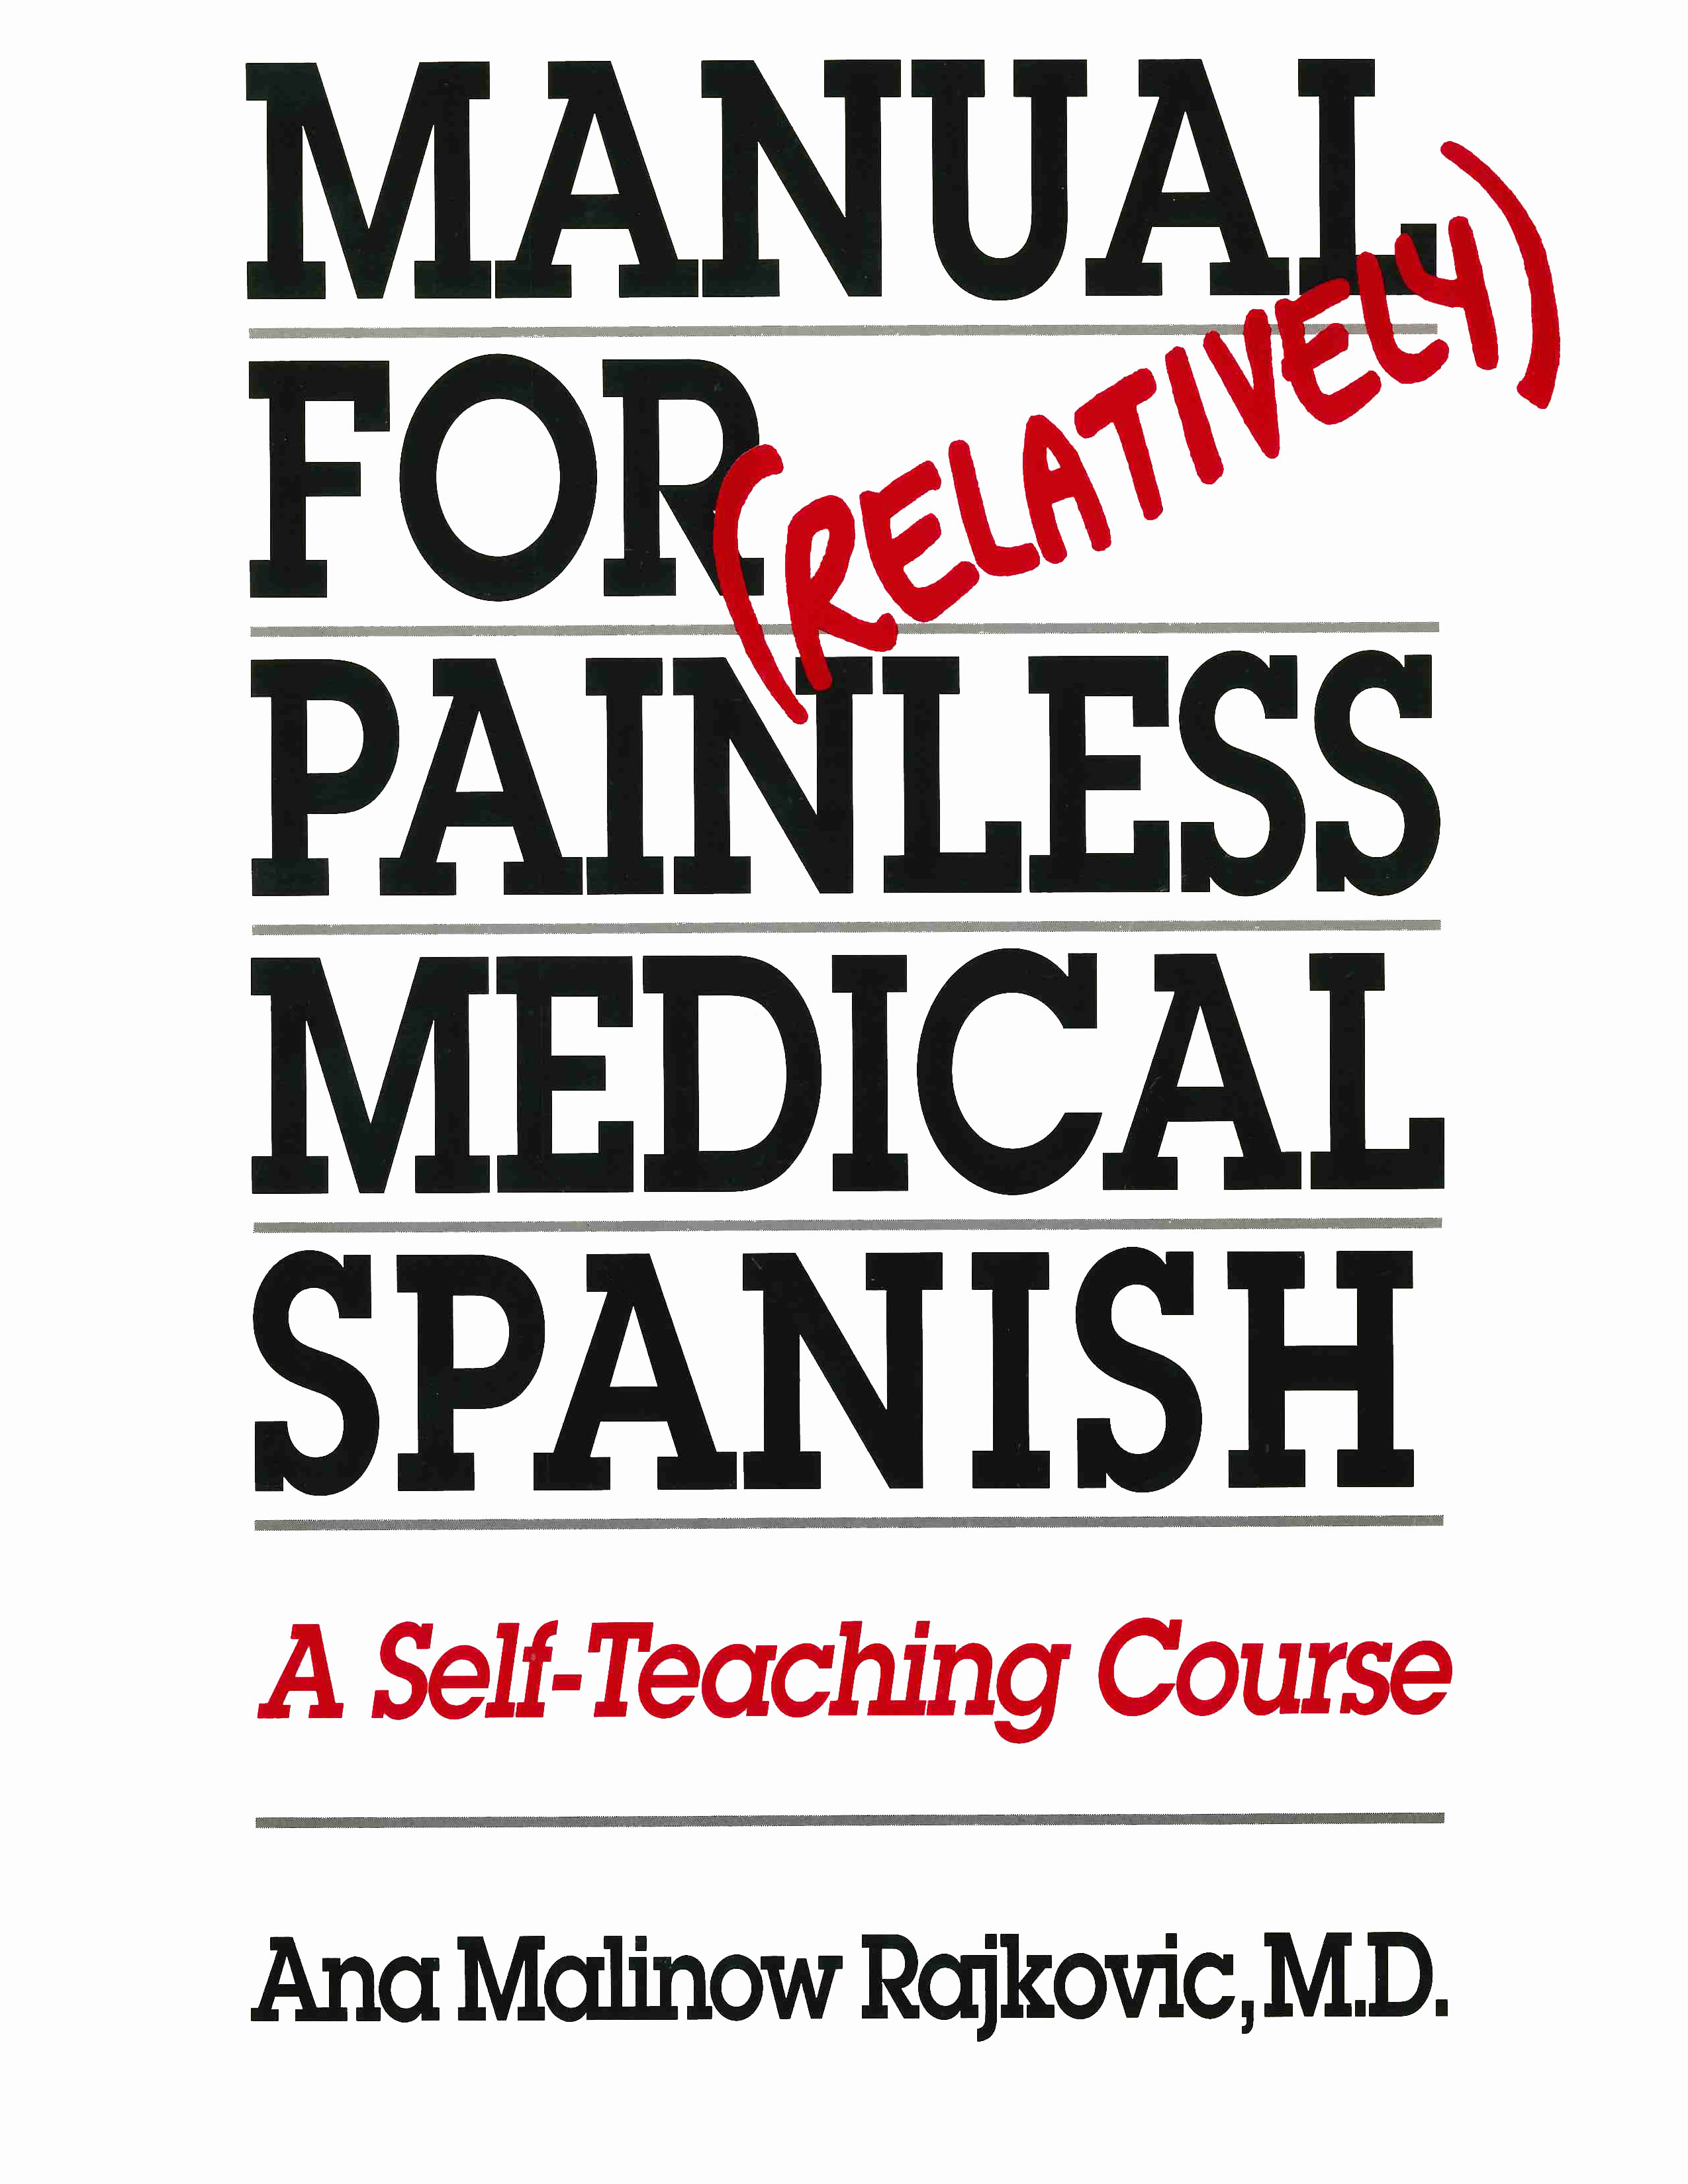 Manual for (Relatively) Painless Medical Spanish